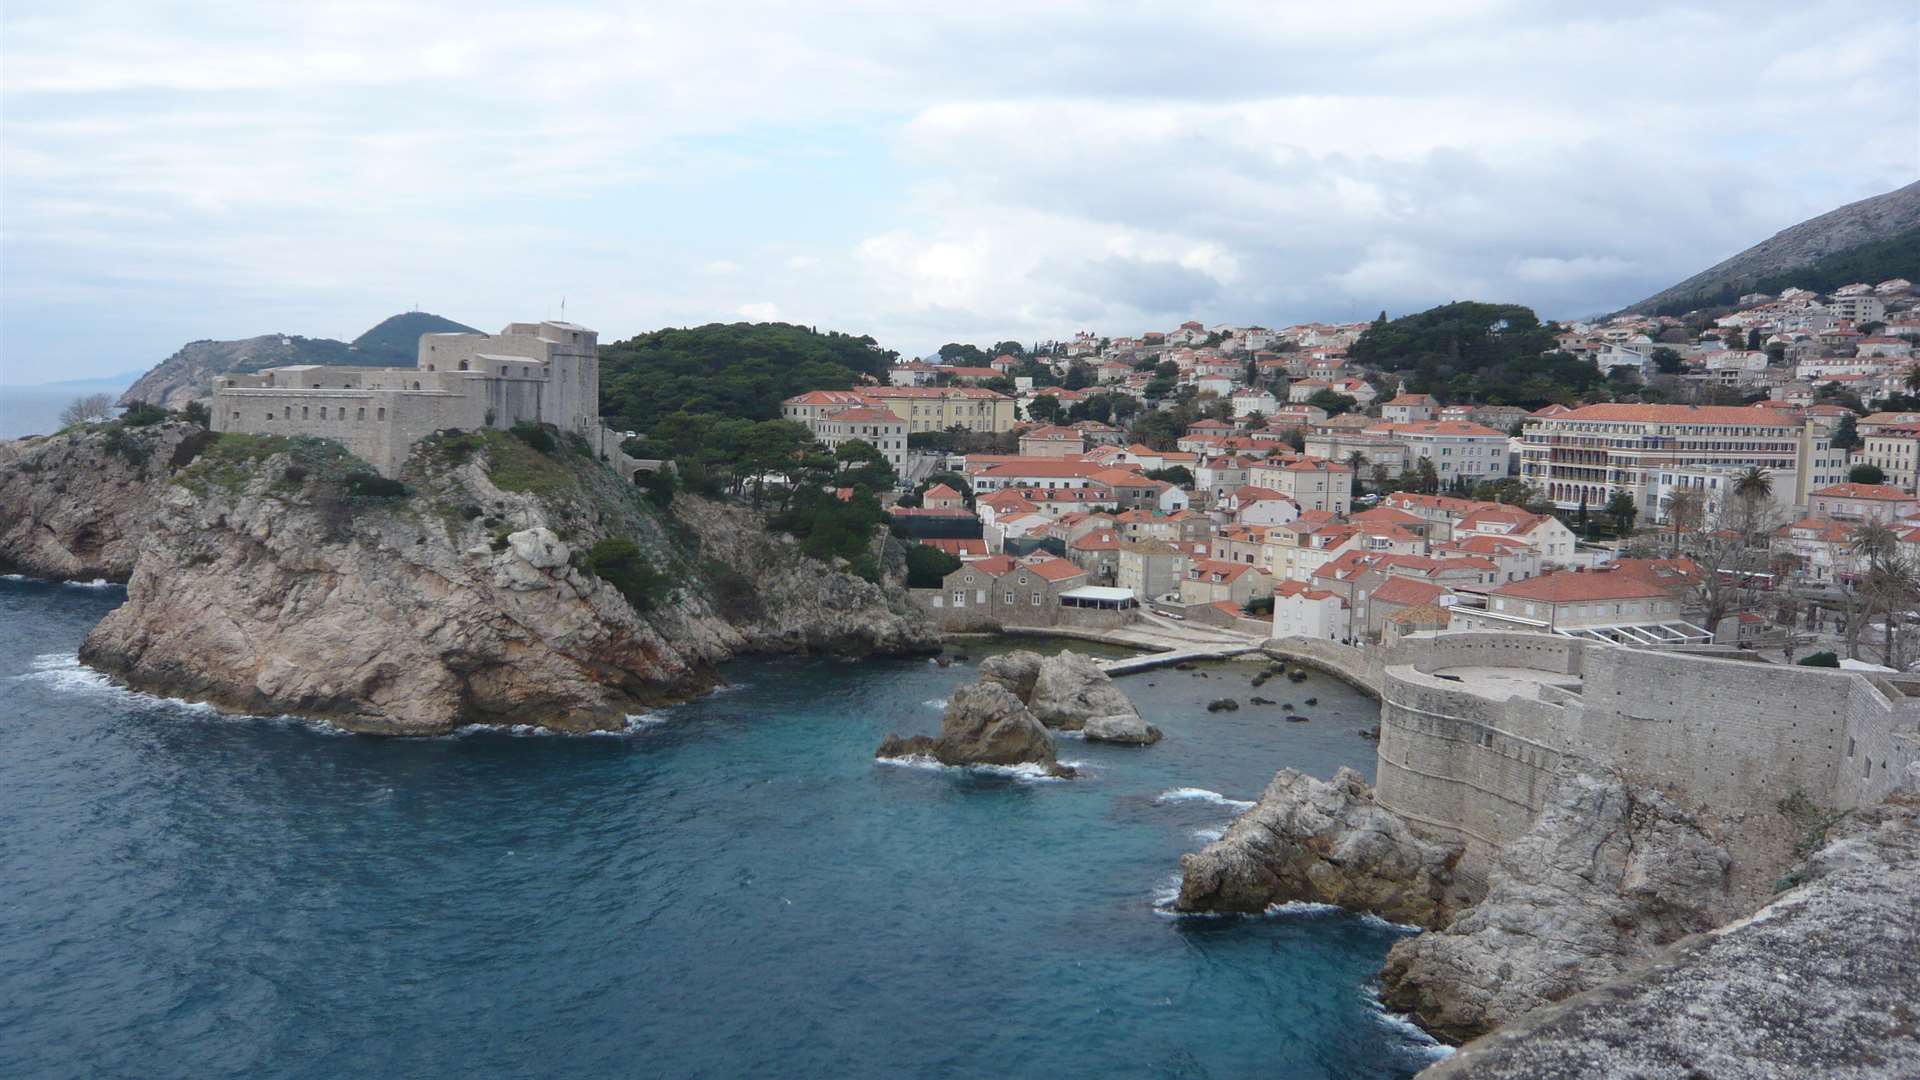 Stunning views from a tour of Dubrovnik's old city walls